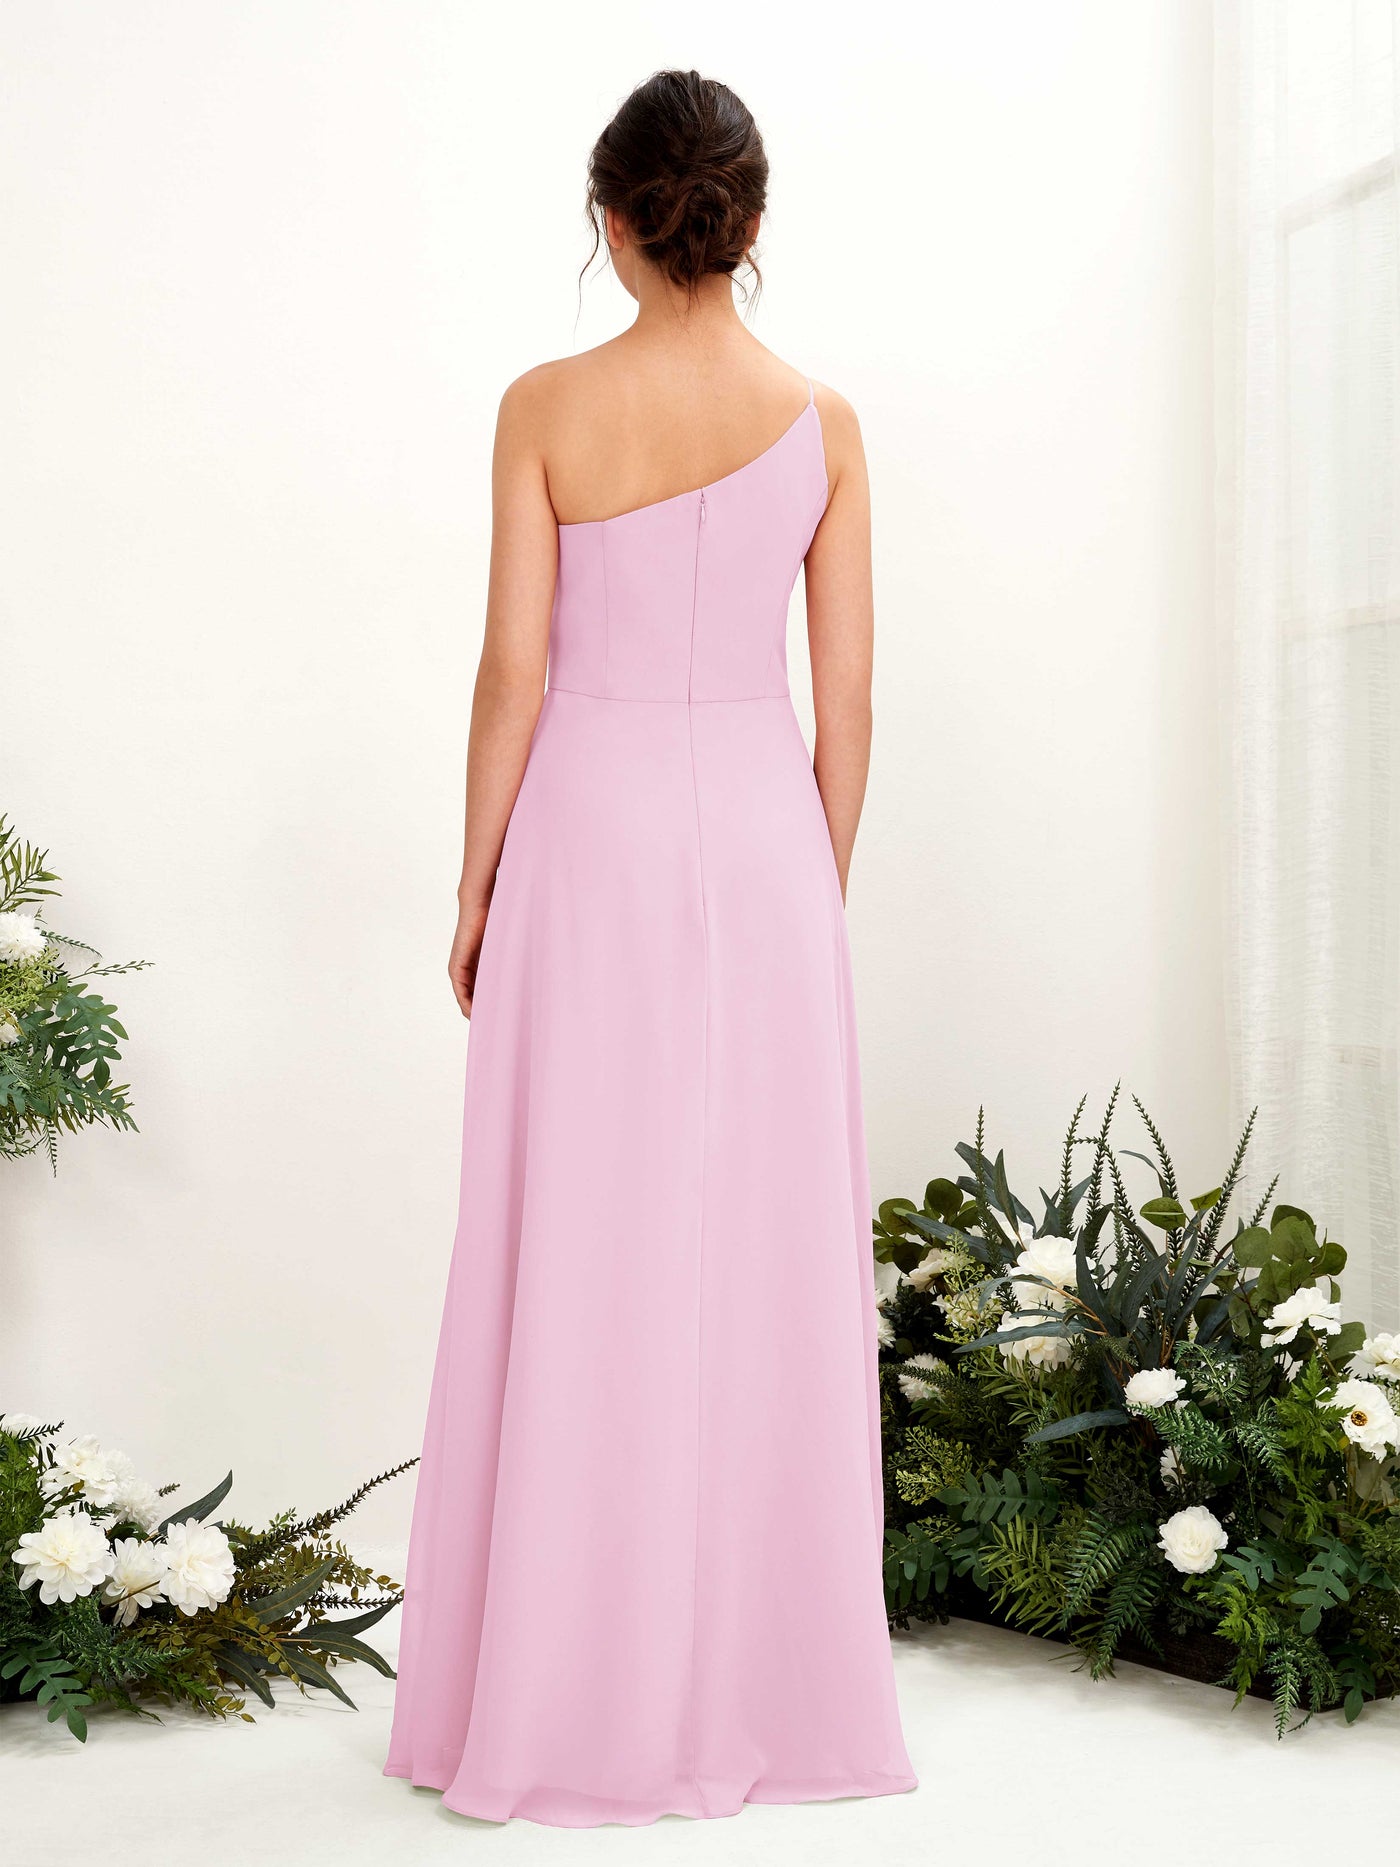 Candy Pink Bridesmaid Dresses Bridesmaid Dress A-line Chiffon One Shoulder Full Length Sleeveless Wedding Party Dress (81225739)#color_candy-pink